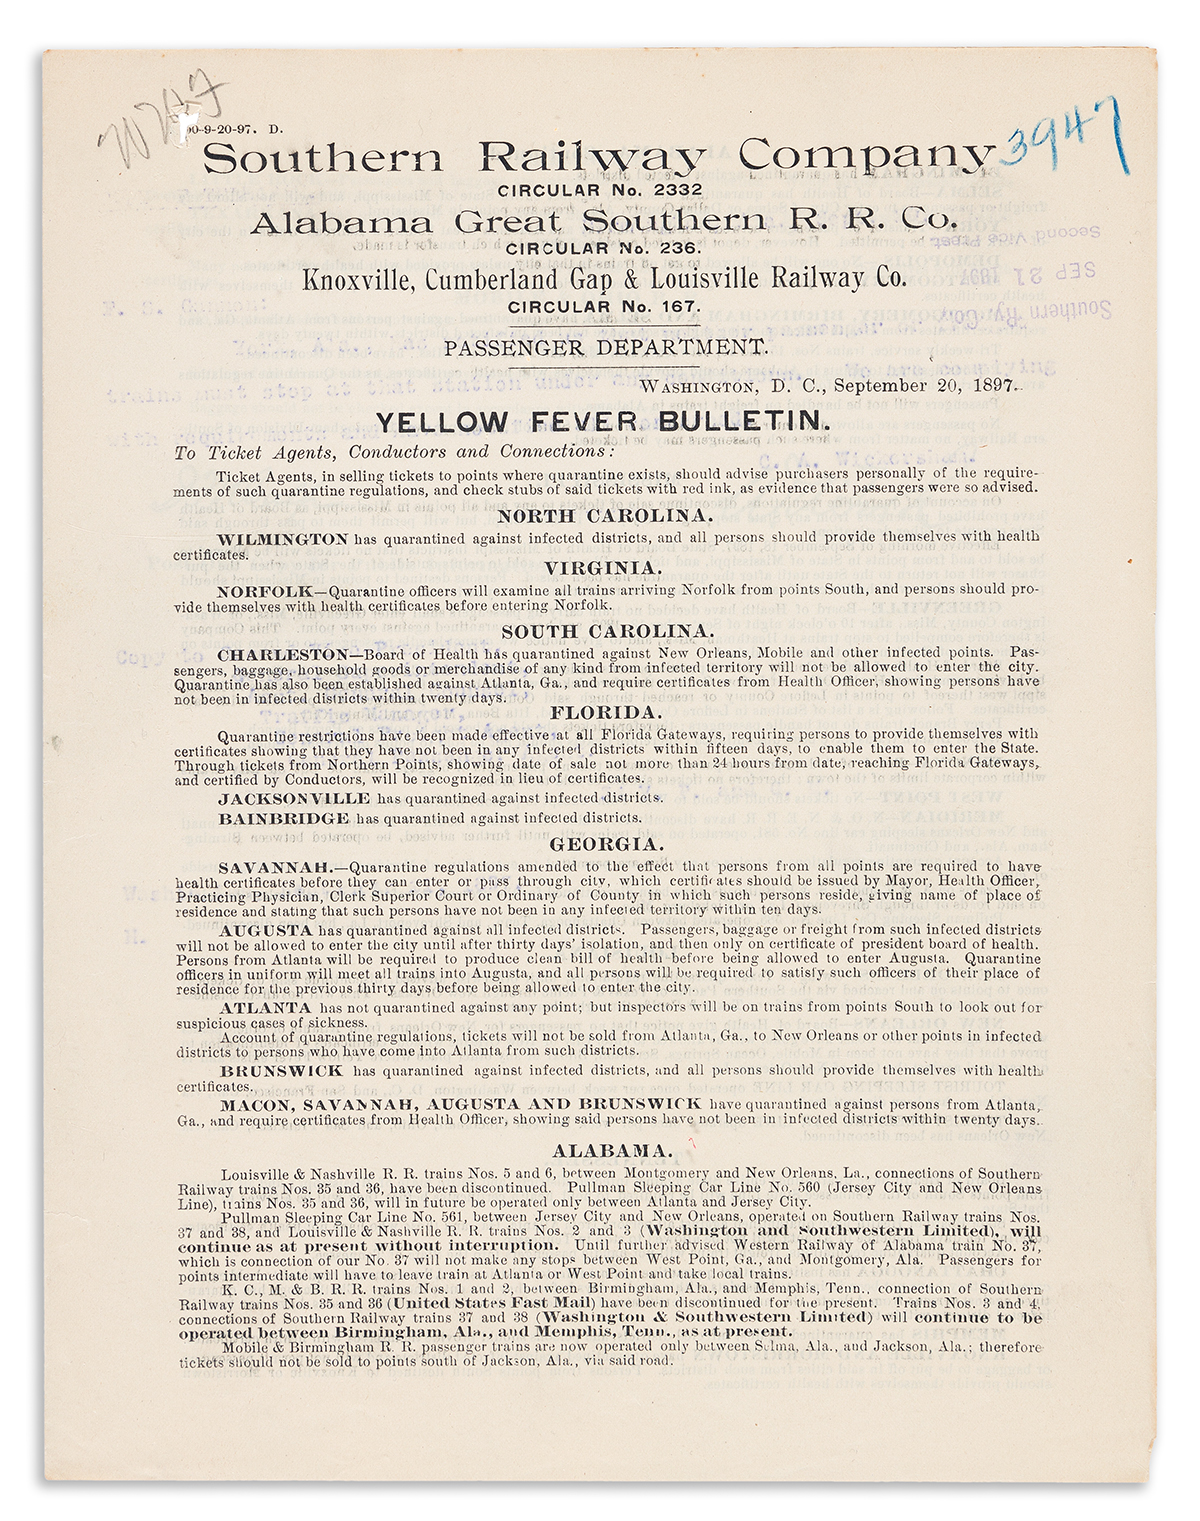 (MEDICINE.) Large group of railroad Yellow Fever Bulletins detailing quarantine conditions in southern cities.